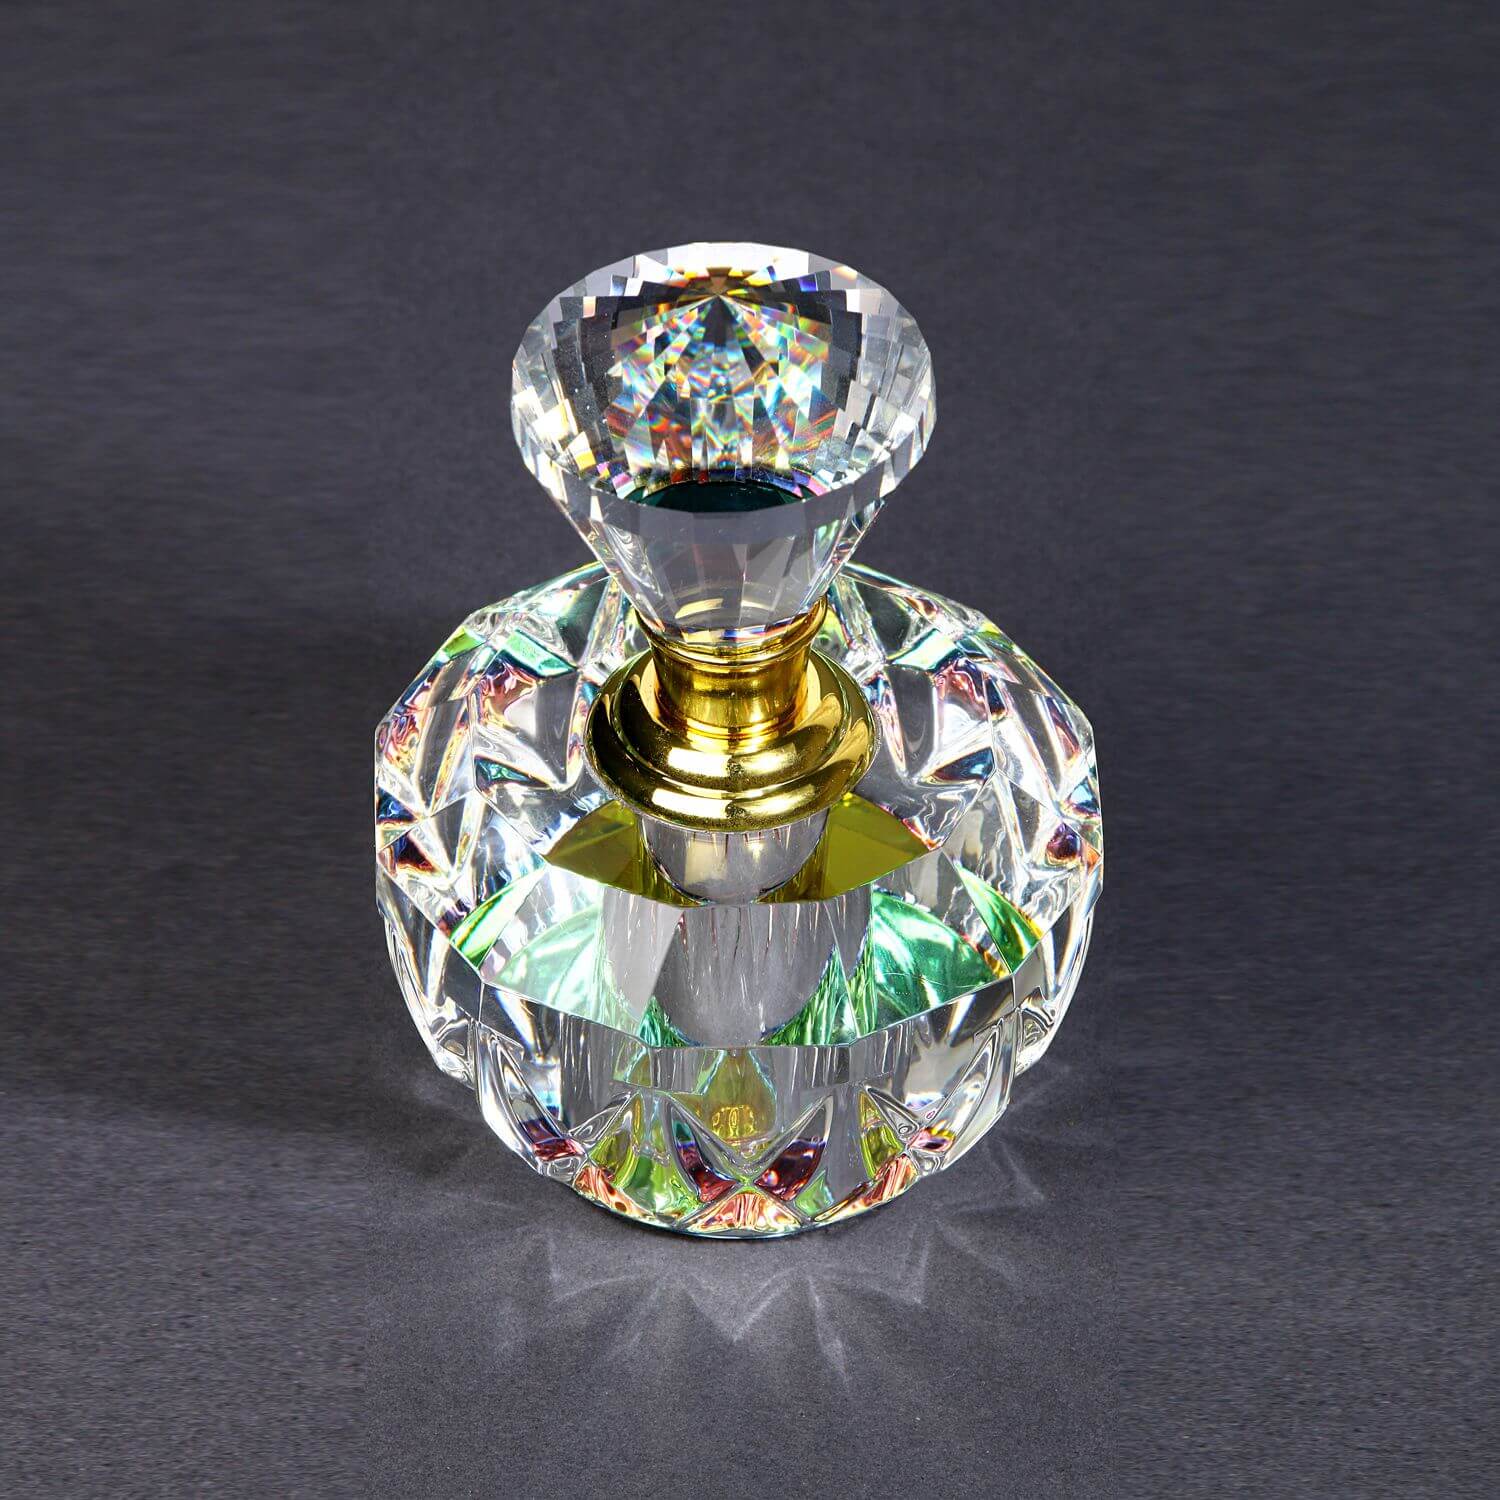 Exclusive Crystal Empty Attar Bottle 10ml Pack of 2